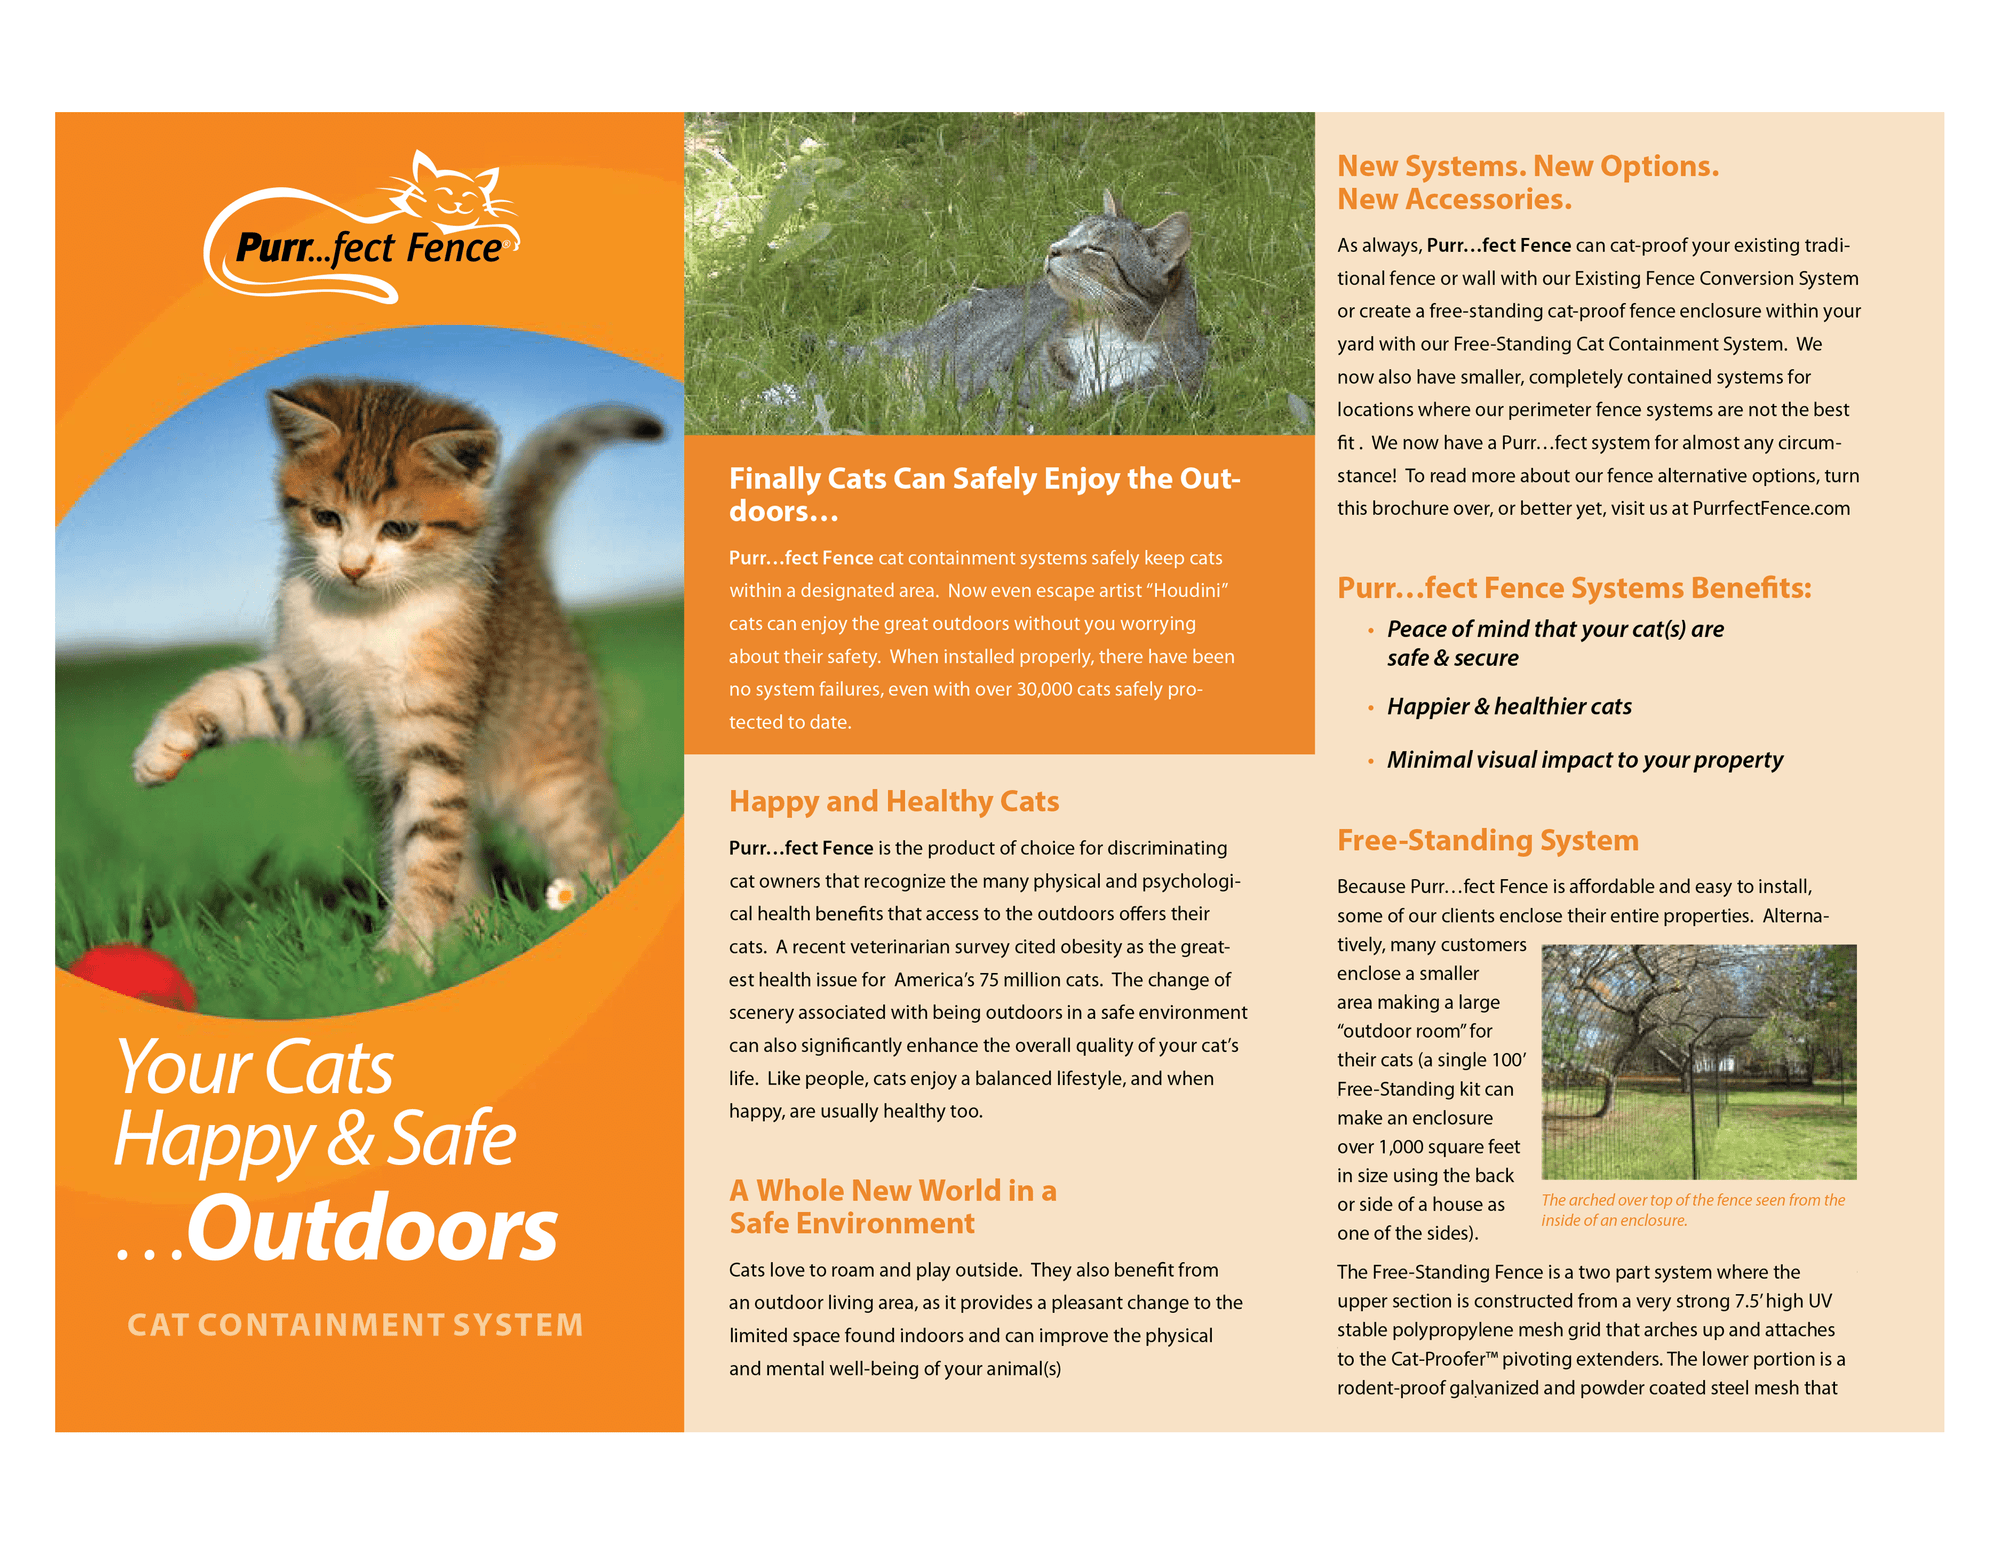 Small preview image of the first page of an ebook on cat fences by Dog Proofer, covering introduction or essential concepts.